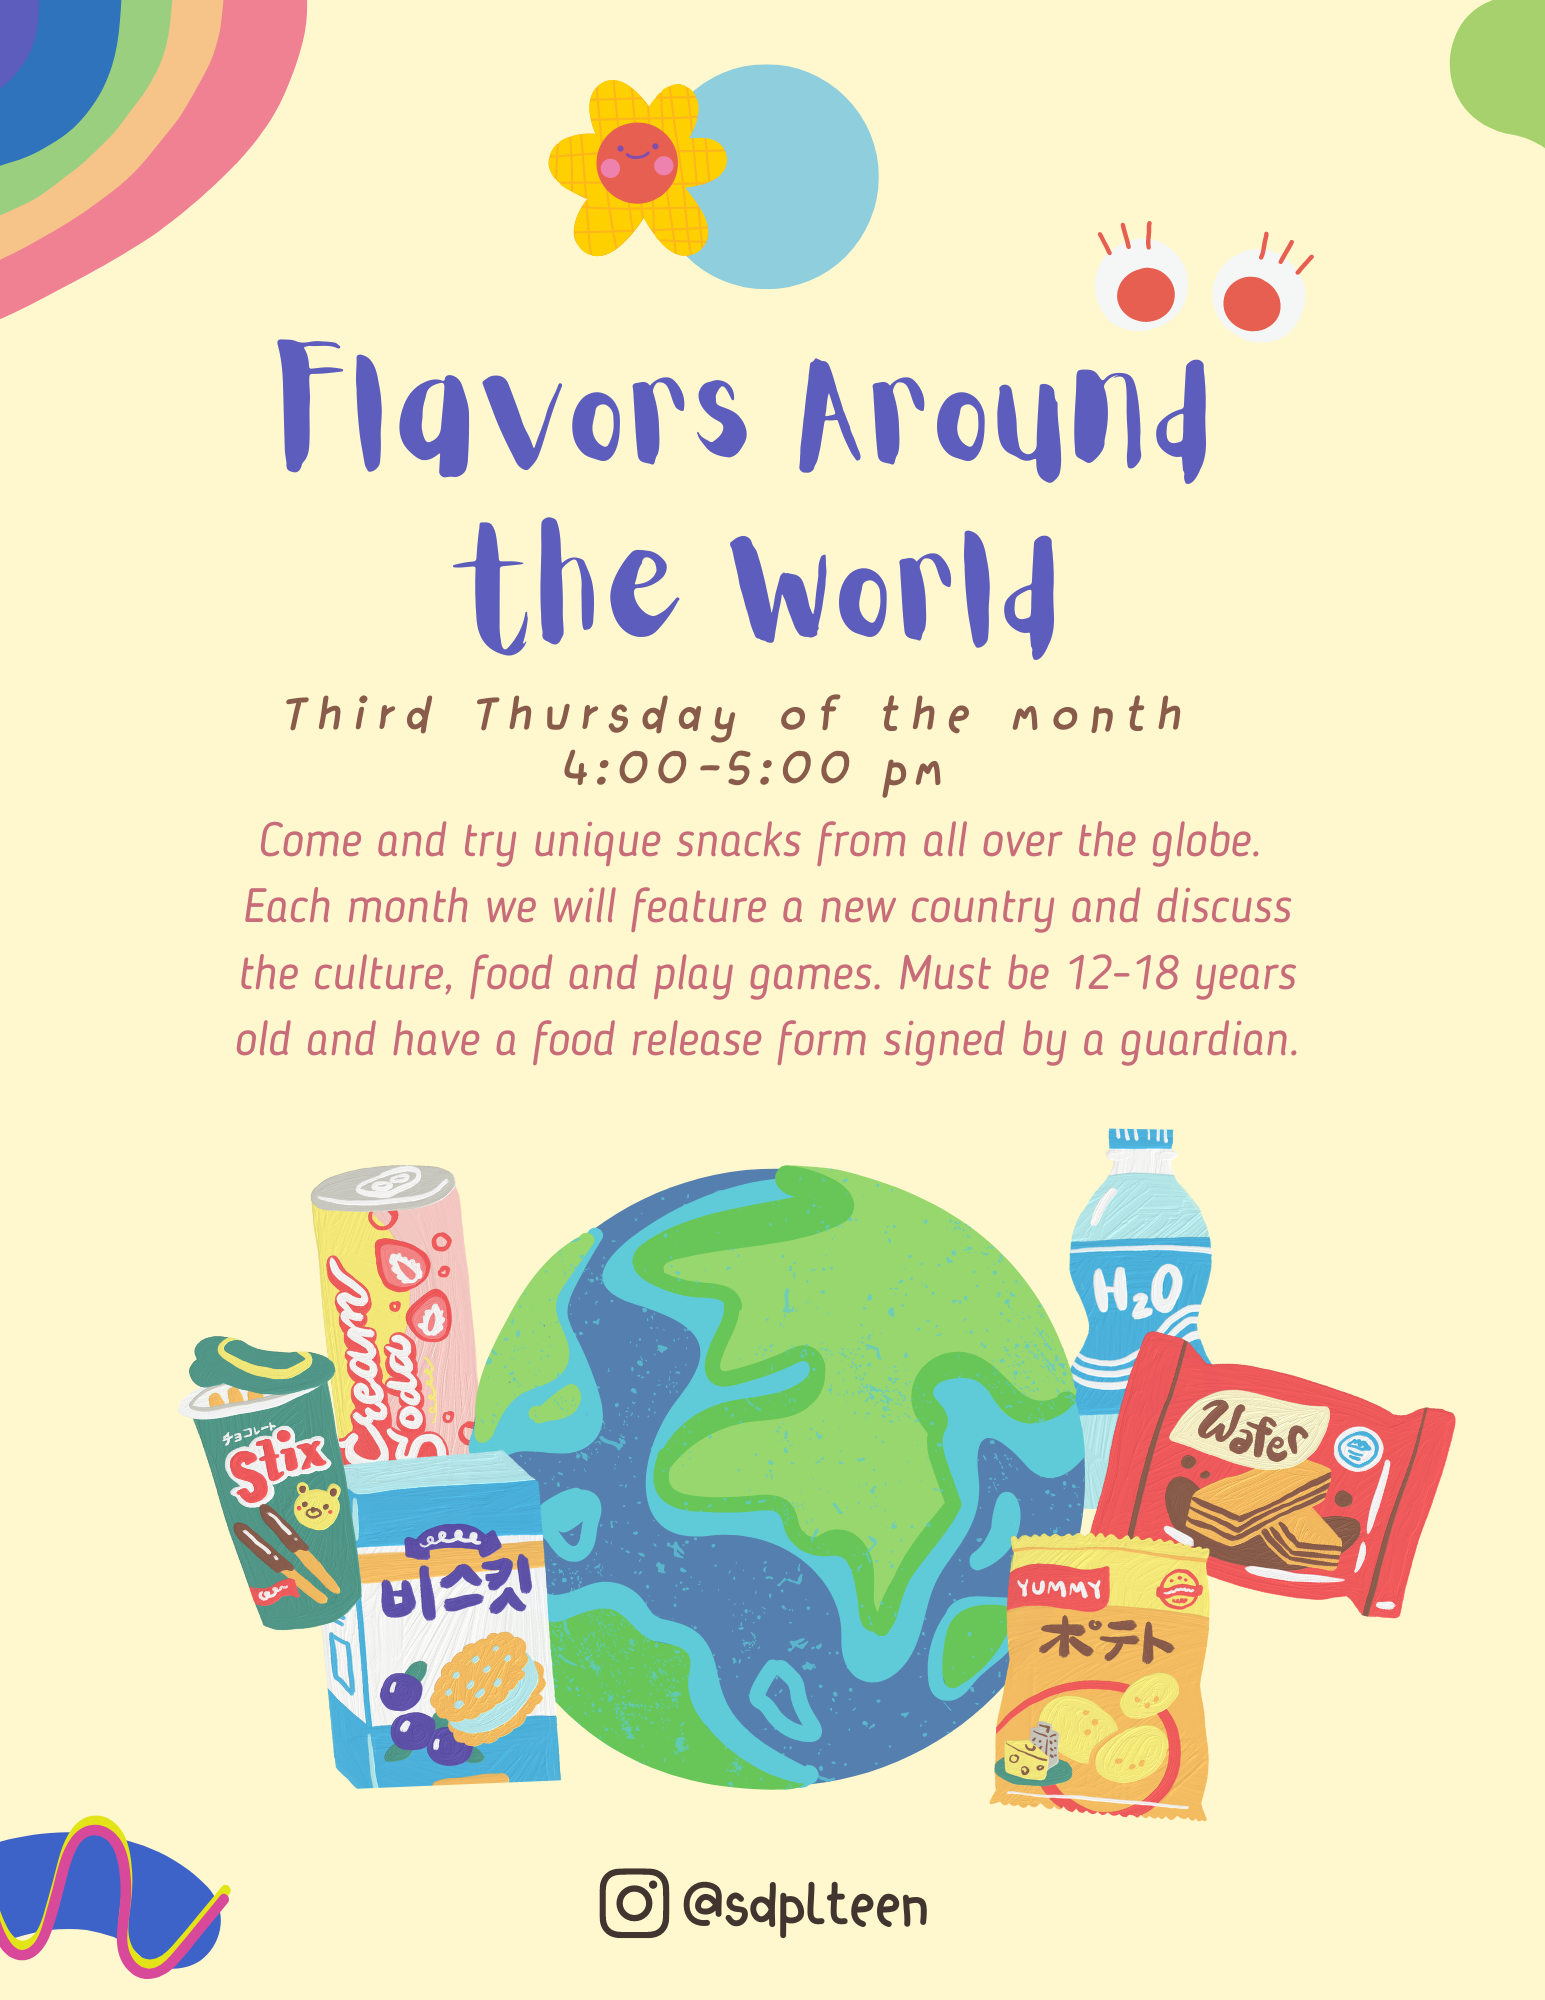 Flavors around the world. Third Thursday of the month, 4-5pm. Come and try unique snacks from all over the globe.  Each month we will feature a new country and discuss the culture, food and play games. Must be 12-18 years old and have a food release form signed by a guardian. Food release form attached on this page.